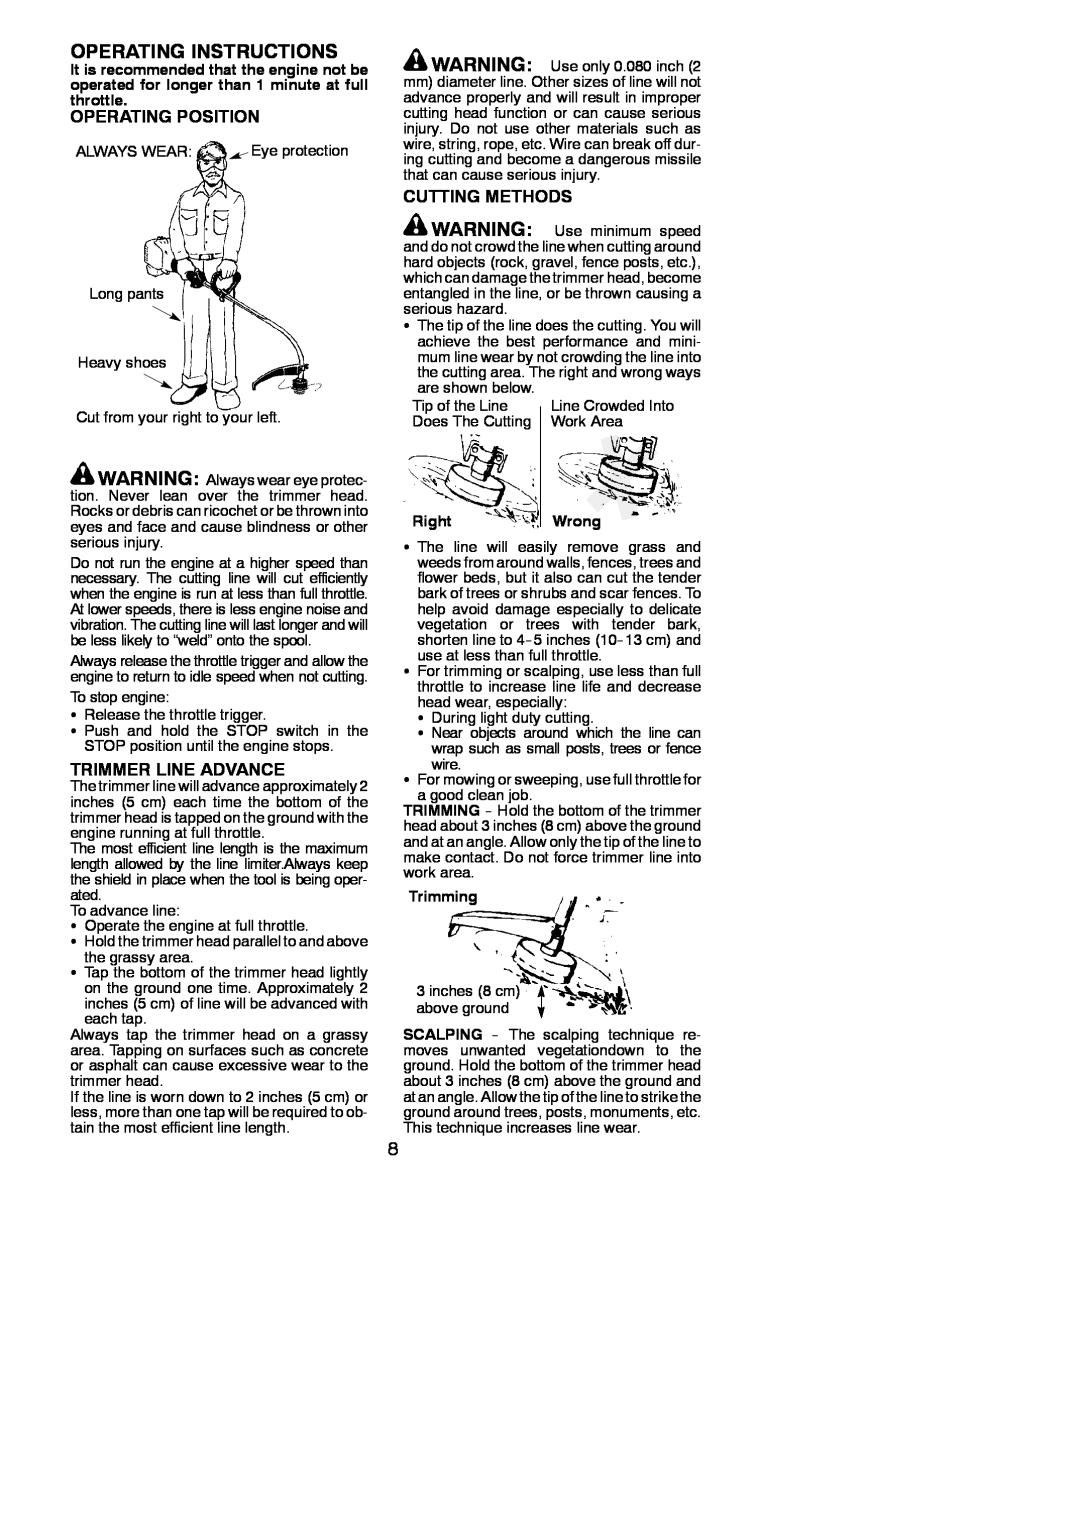 Poulan 952711930 Operating Instructions, Operating Position, Trimmer Line Advance, Cutting Methods, RightWrong, Trimming 